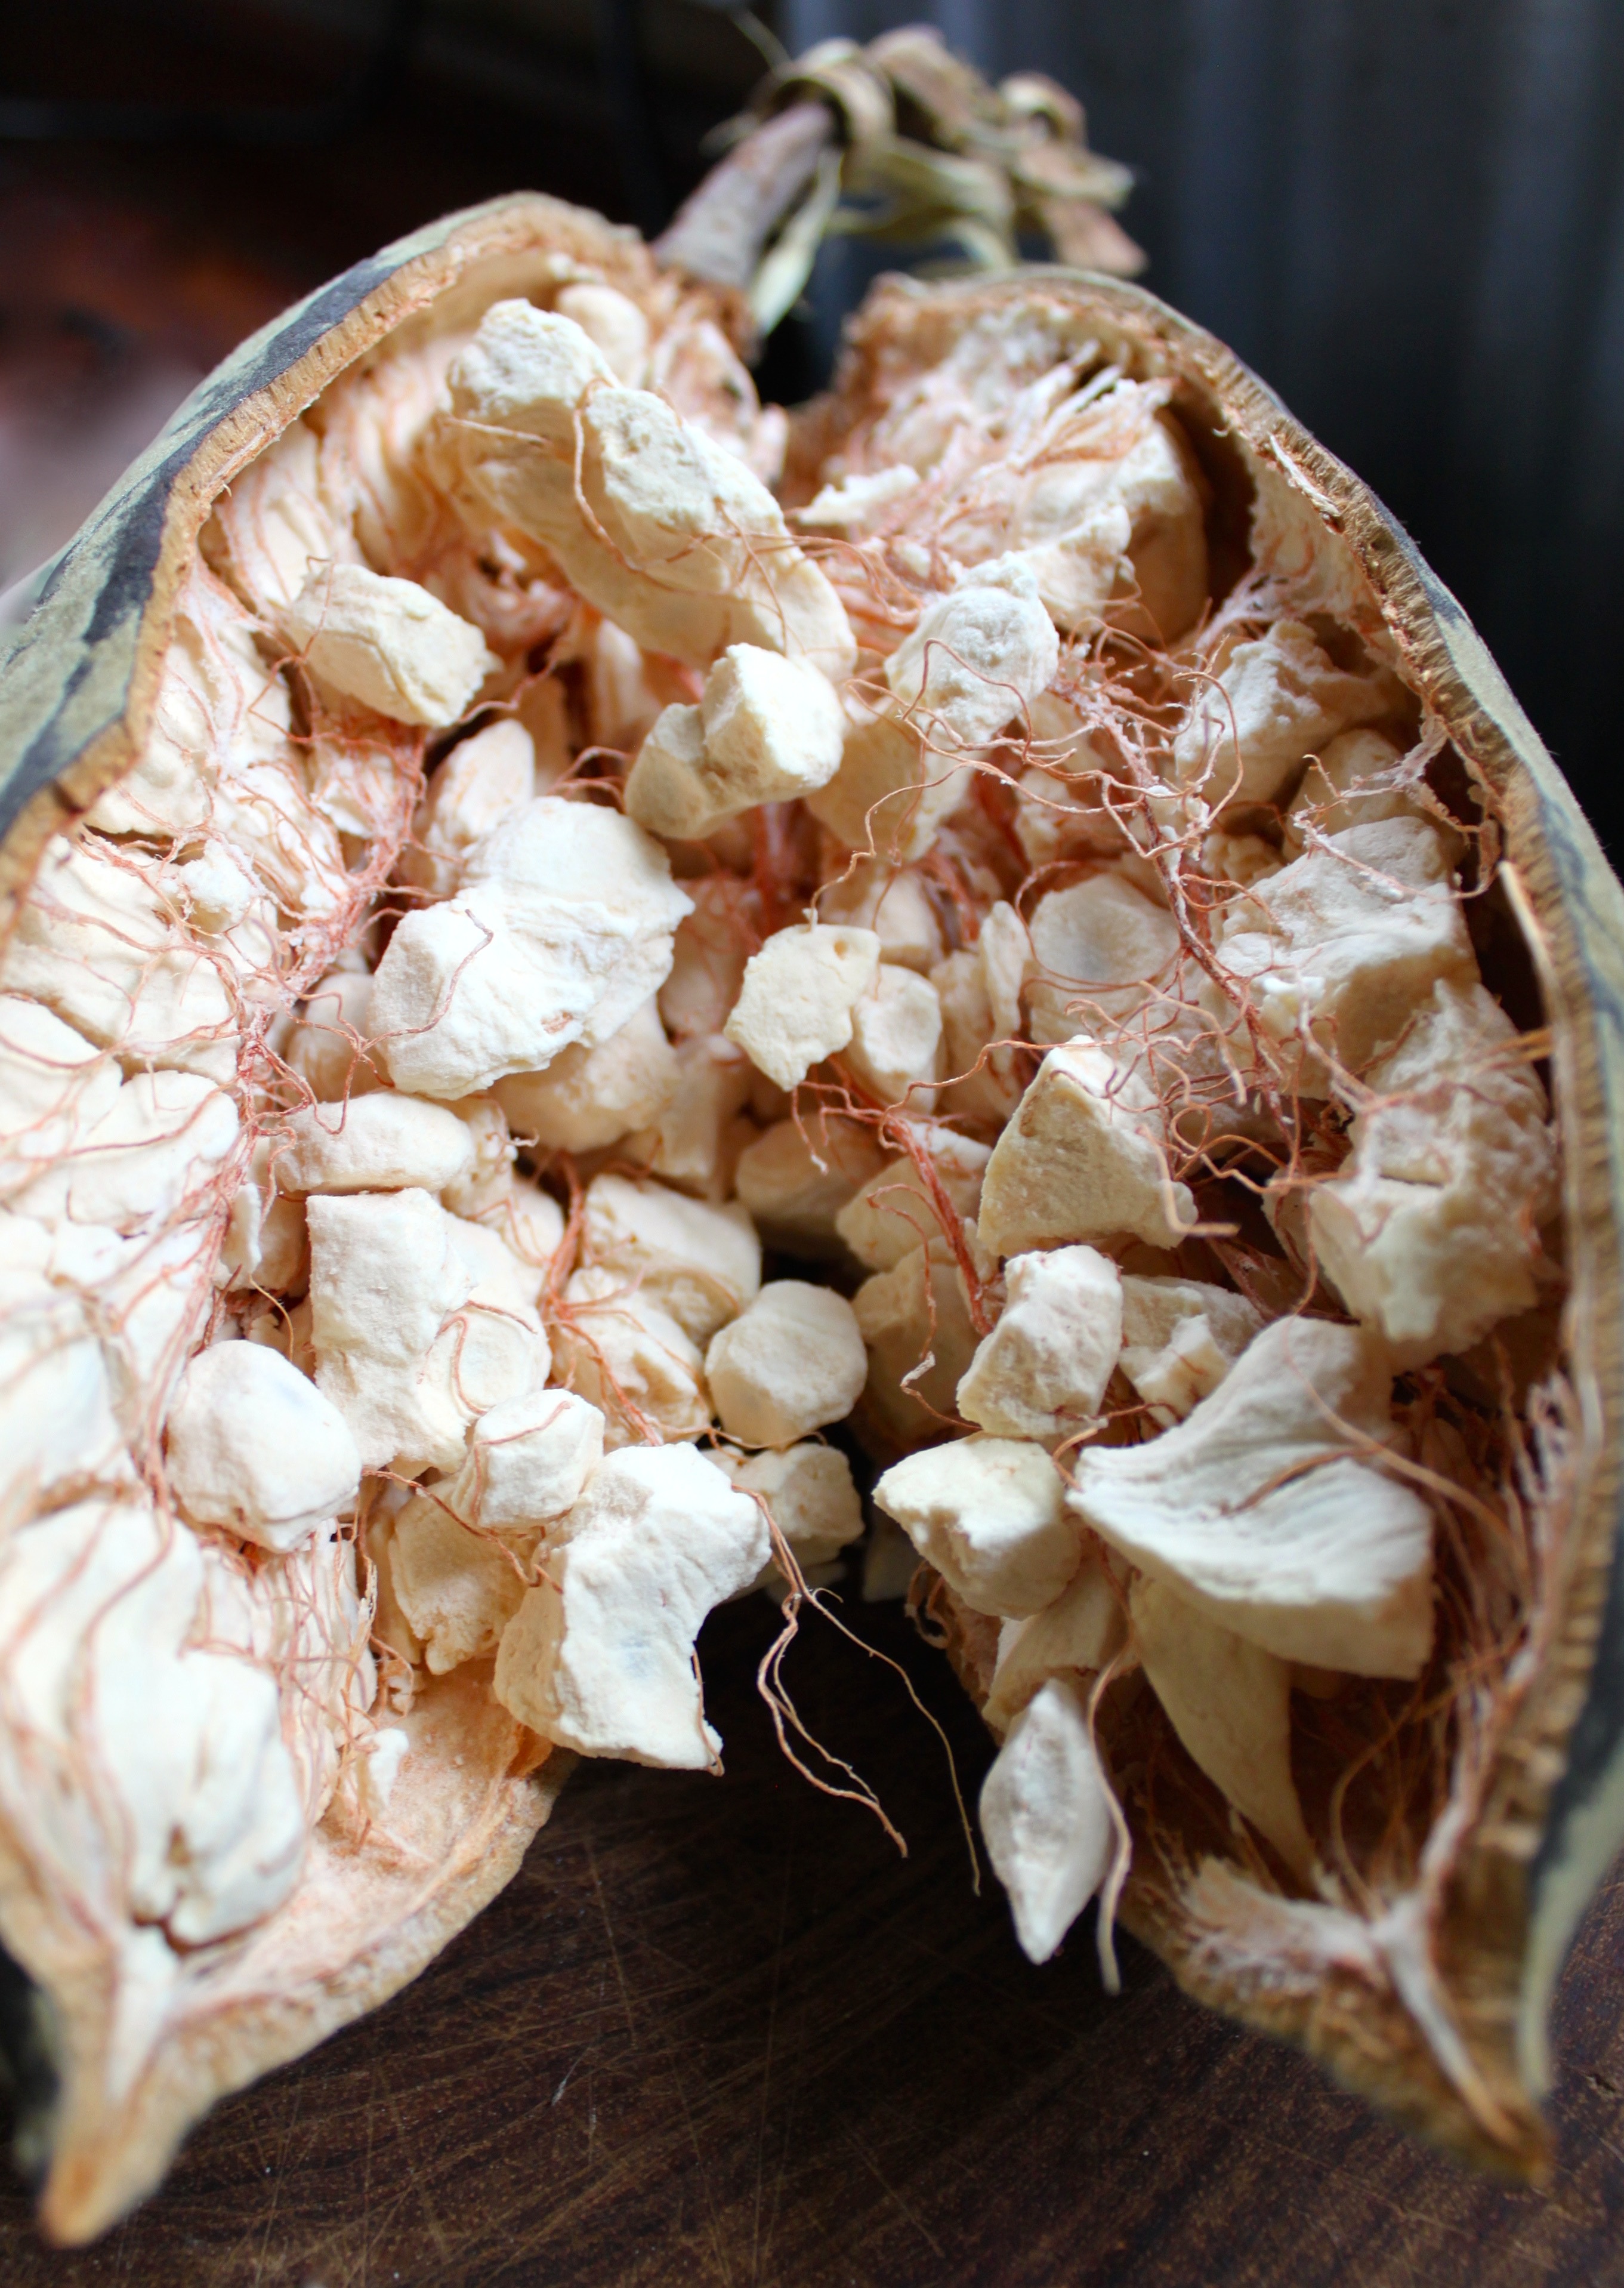 The guts of the baobab fruit.